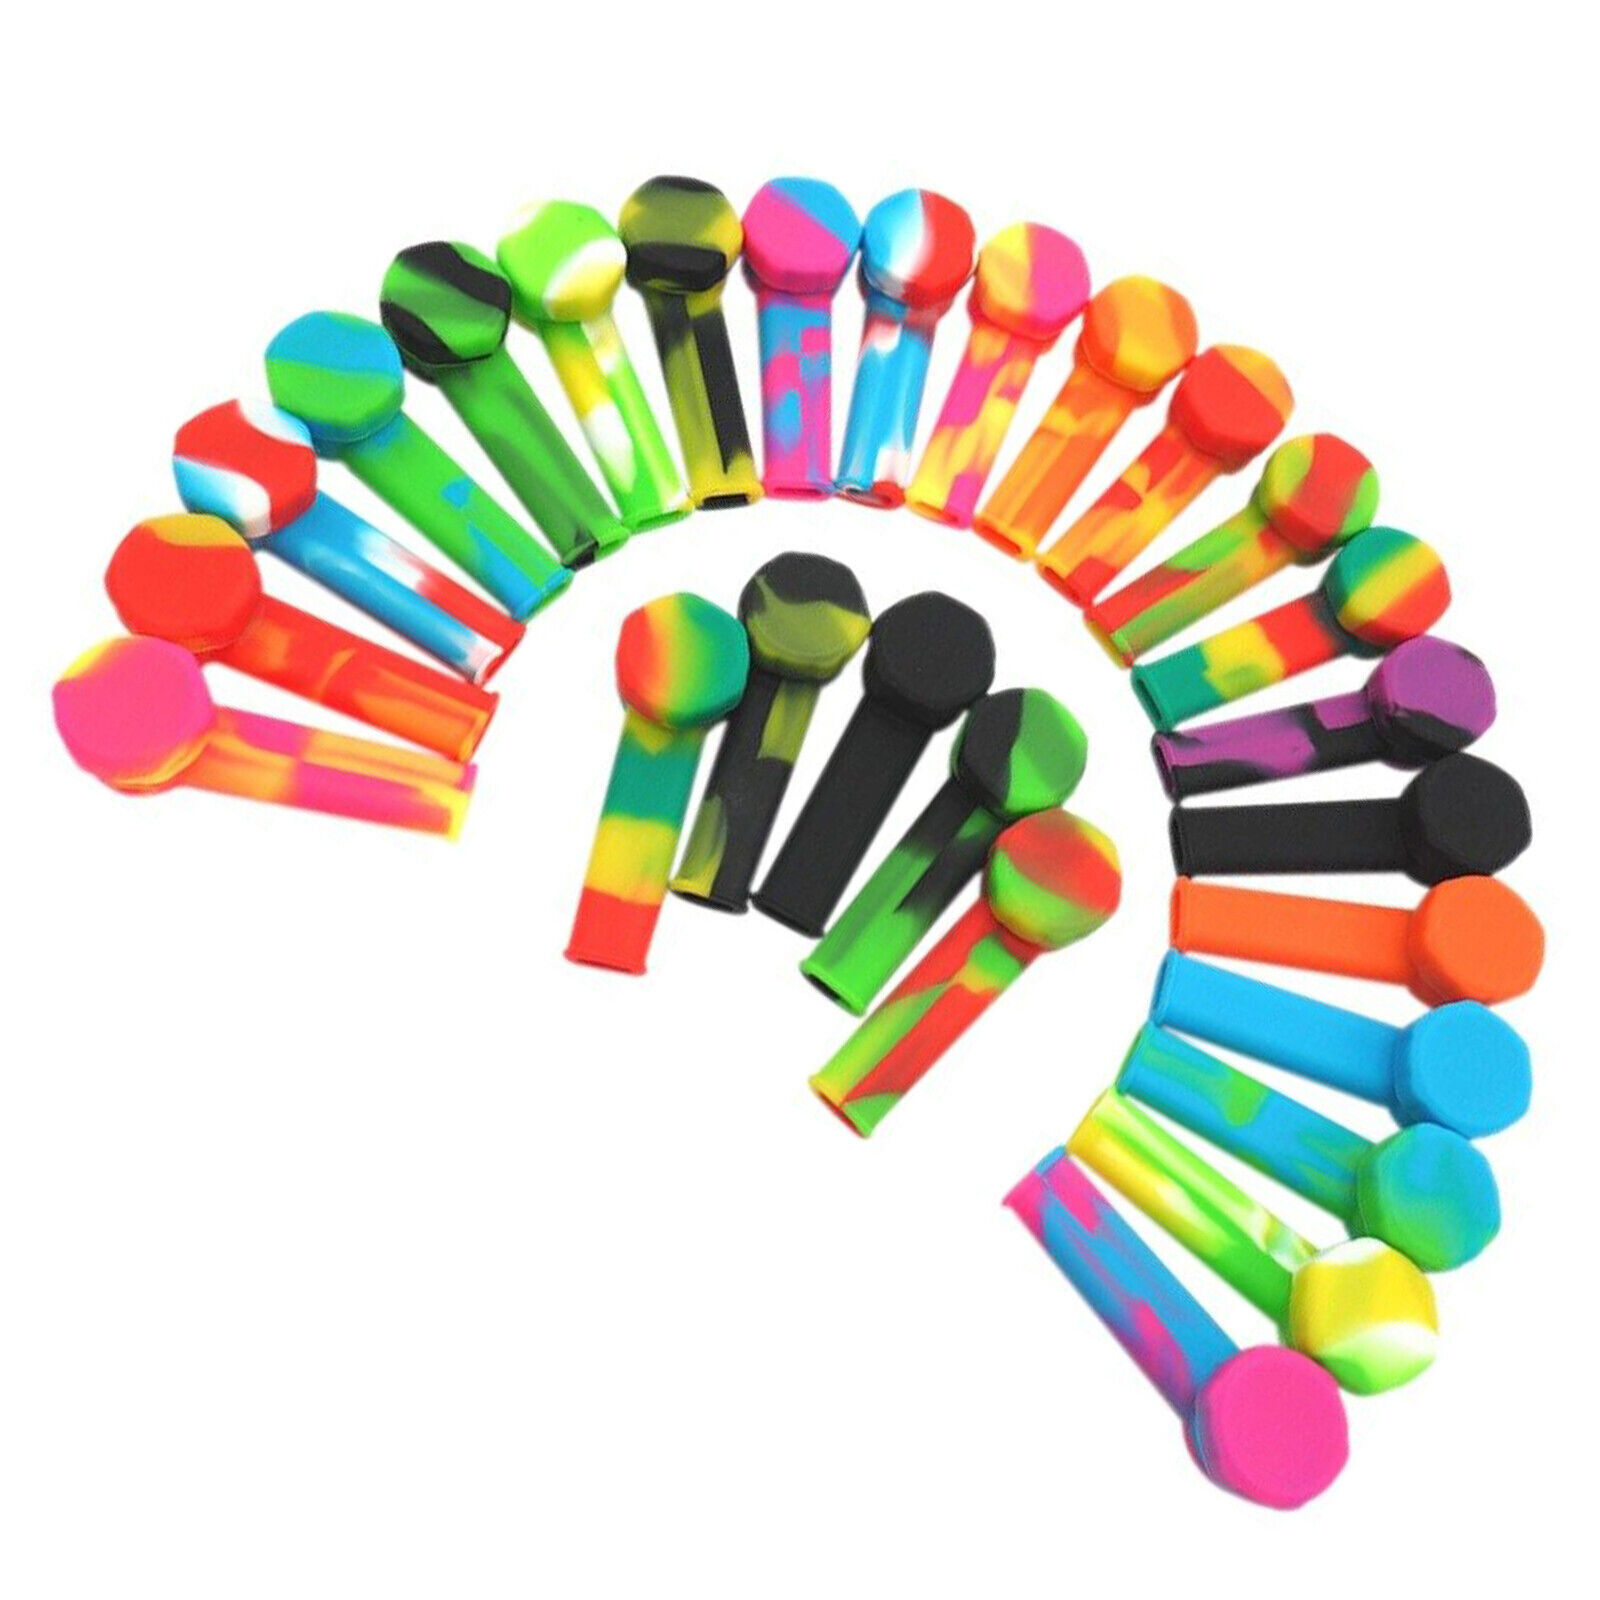 10pc 3.4'' Mini Silicone Smoking Hand Pipe with Metal Bowl & Cap Lid Pocket Pipe